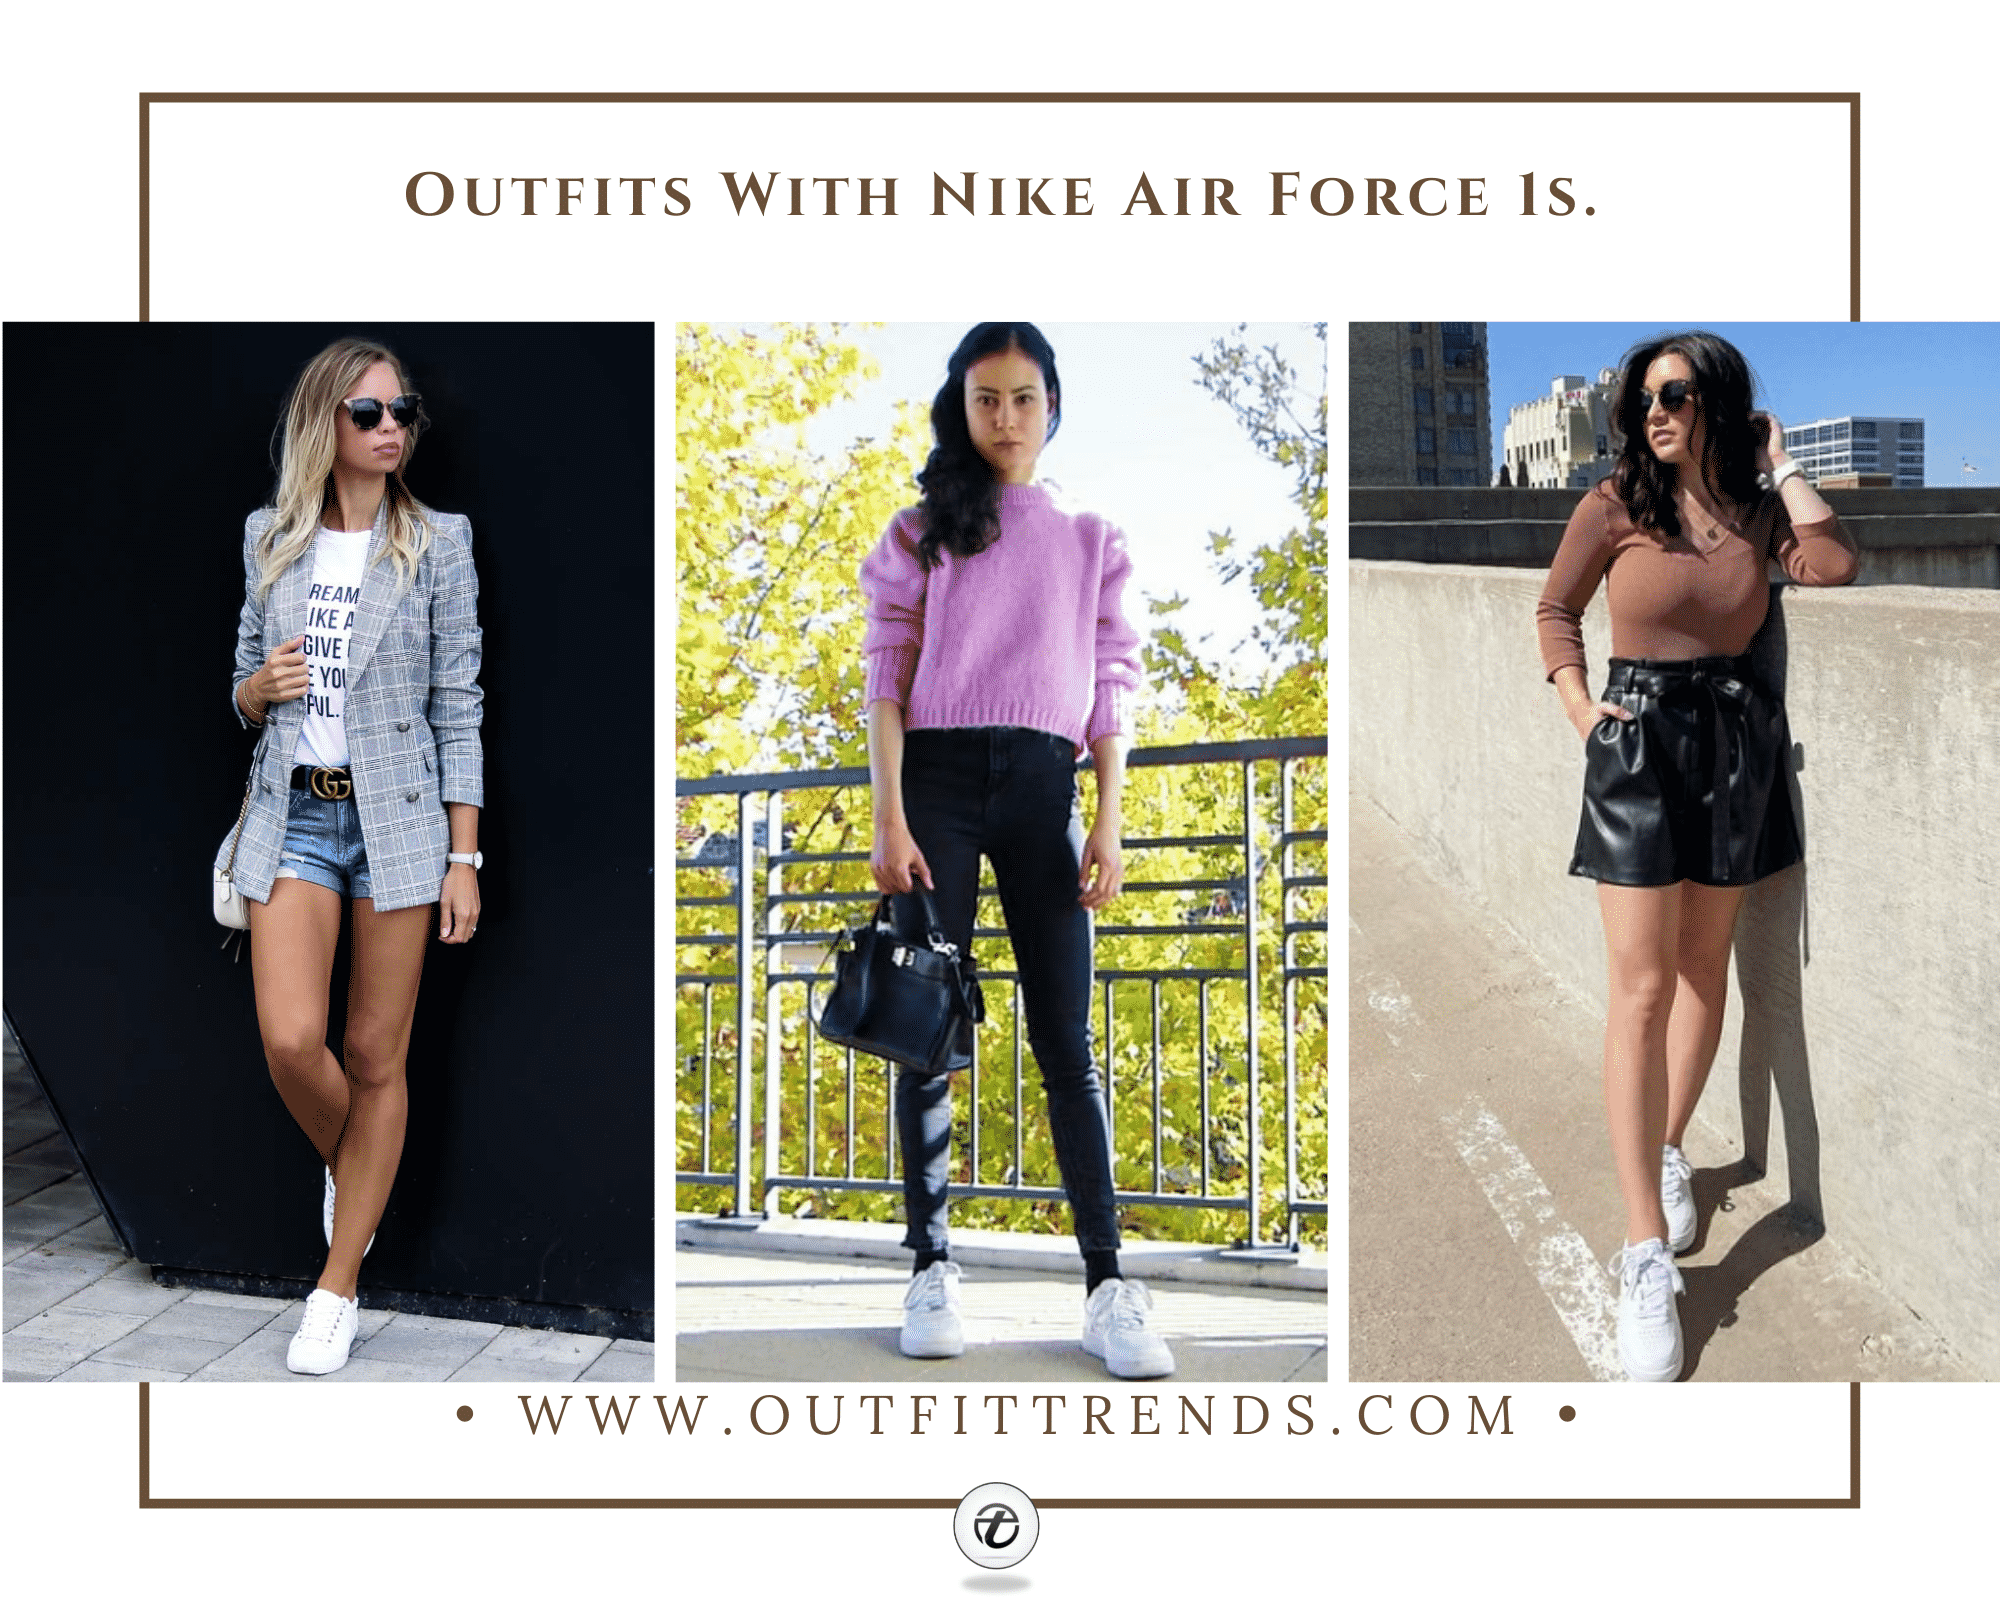 nike air force 1 outfits women fall